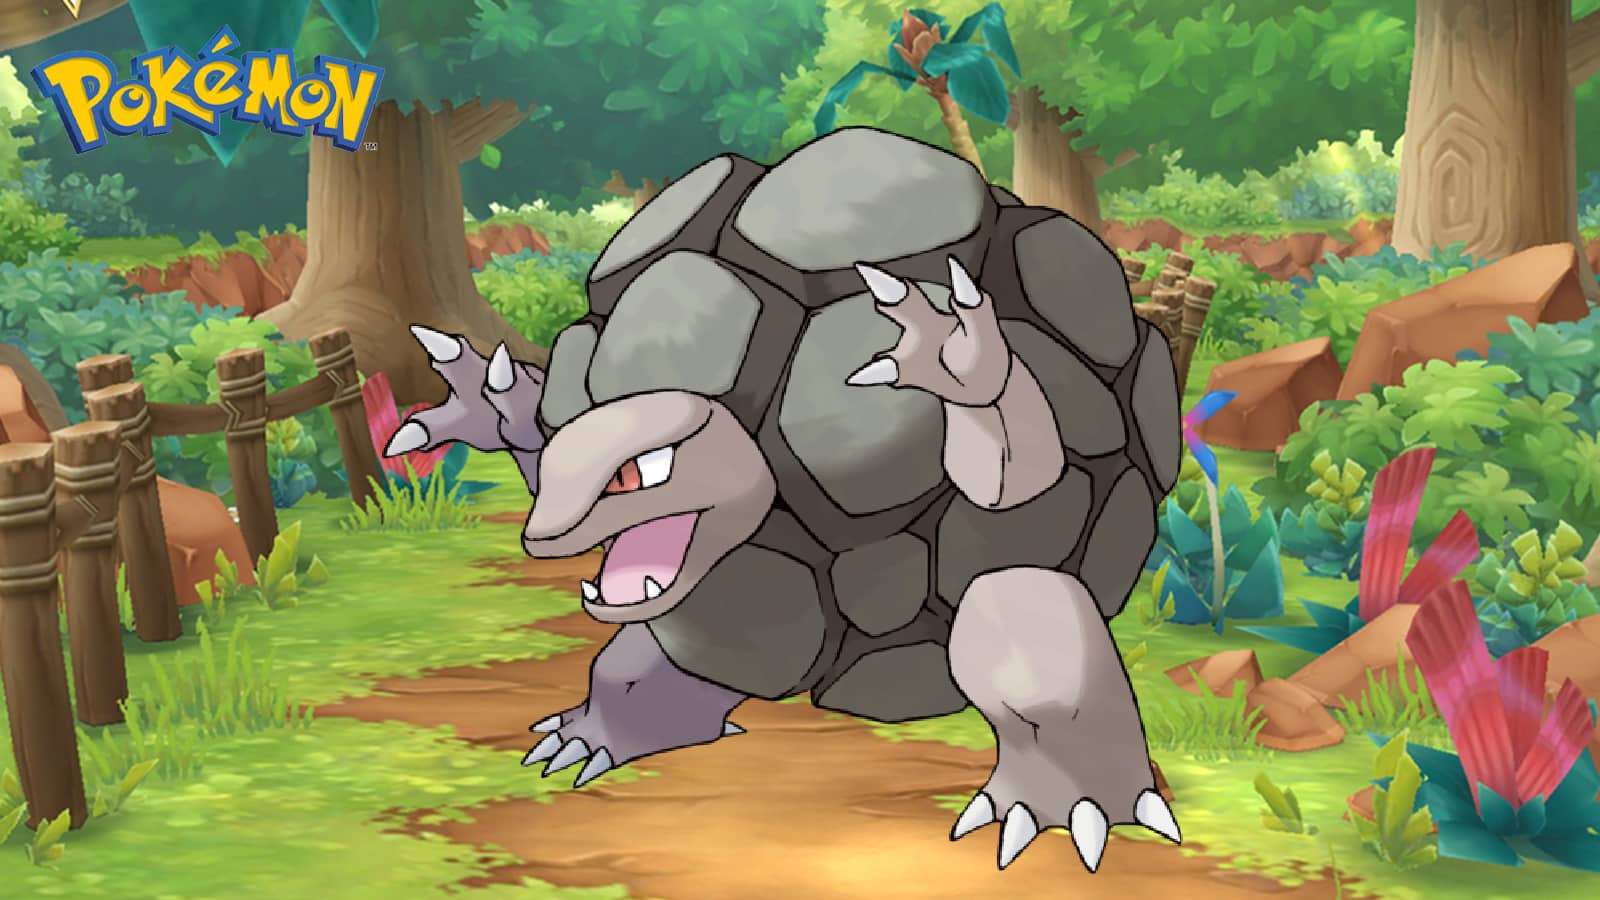 An image of Golem with a Pokemon background